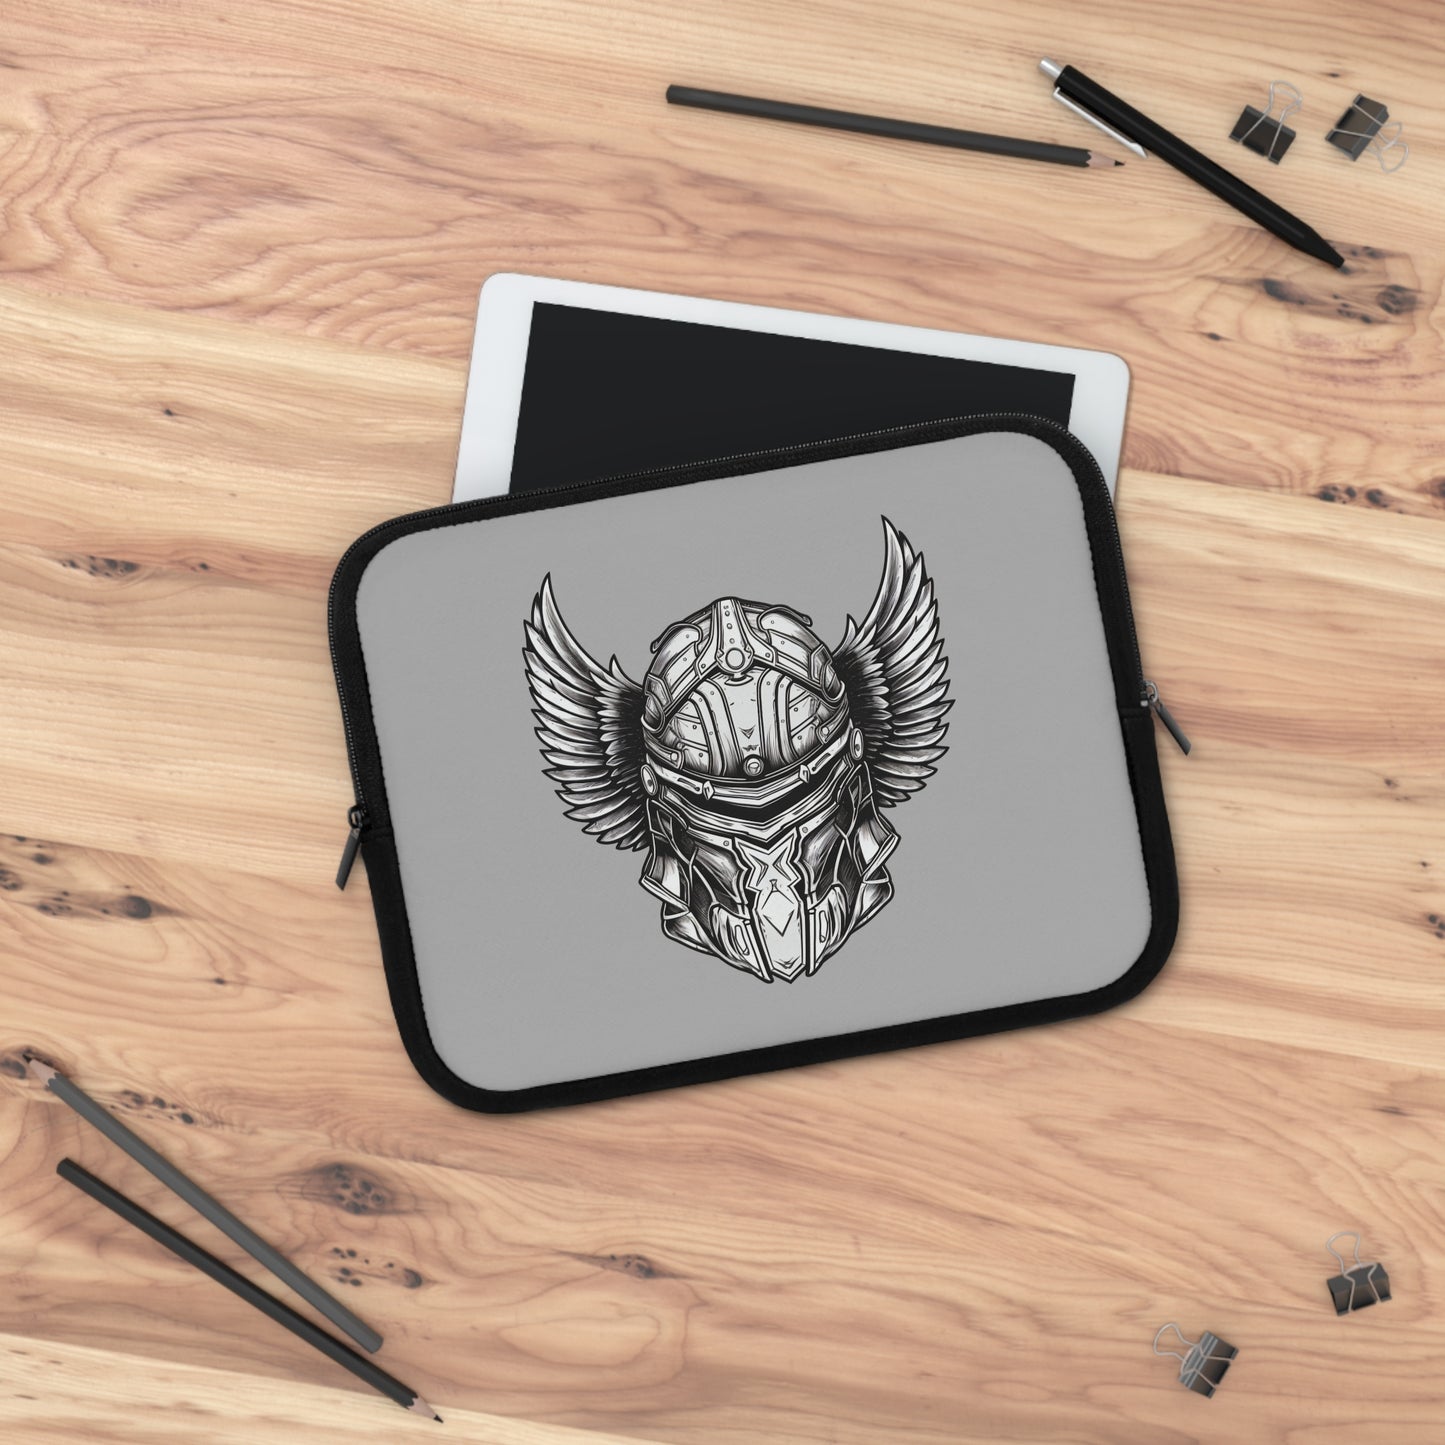 Smite Happens Tablet Sleeve, D&D Laptop Sleeve, DnD iPad Cover, Paladin MacBook Sleeve, Winged Helmet Zipper Pouch, Protective Case